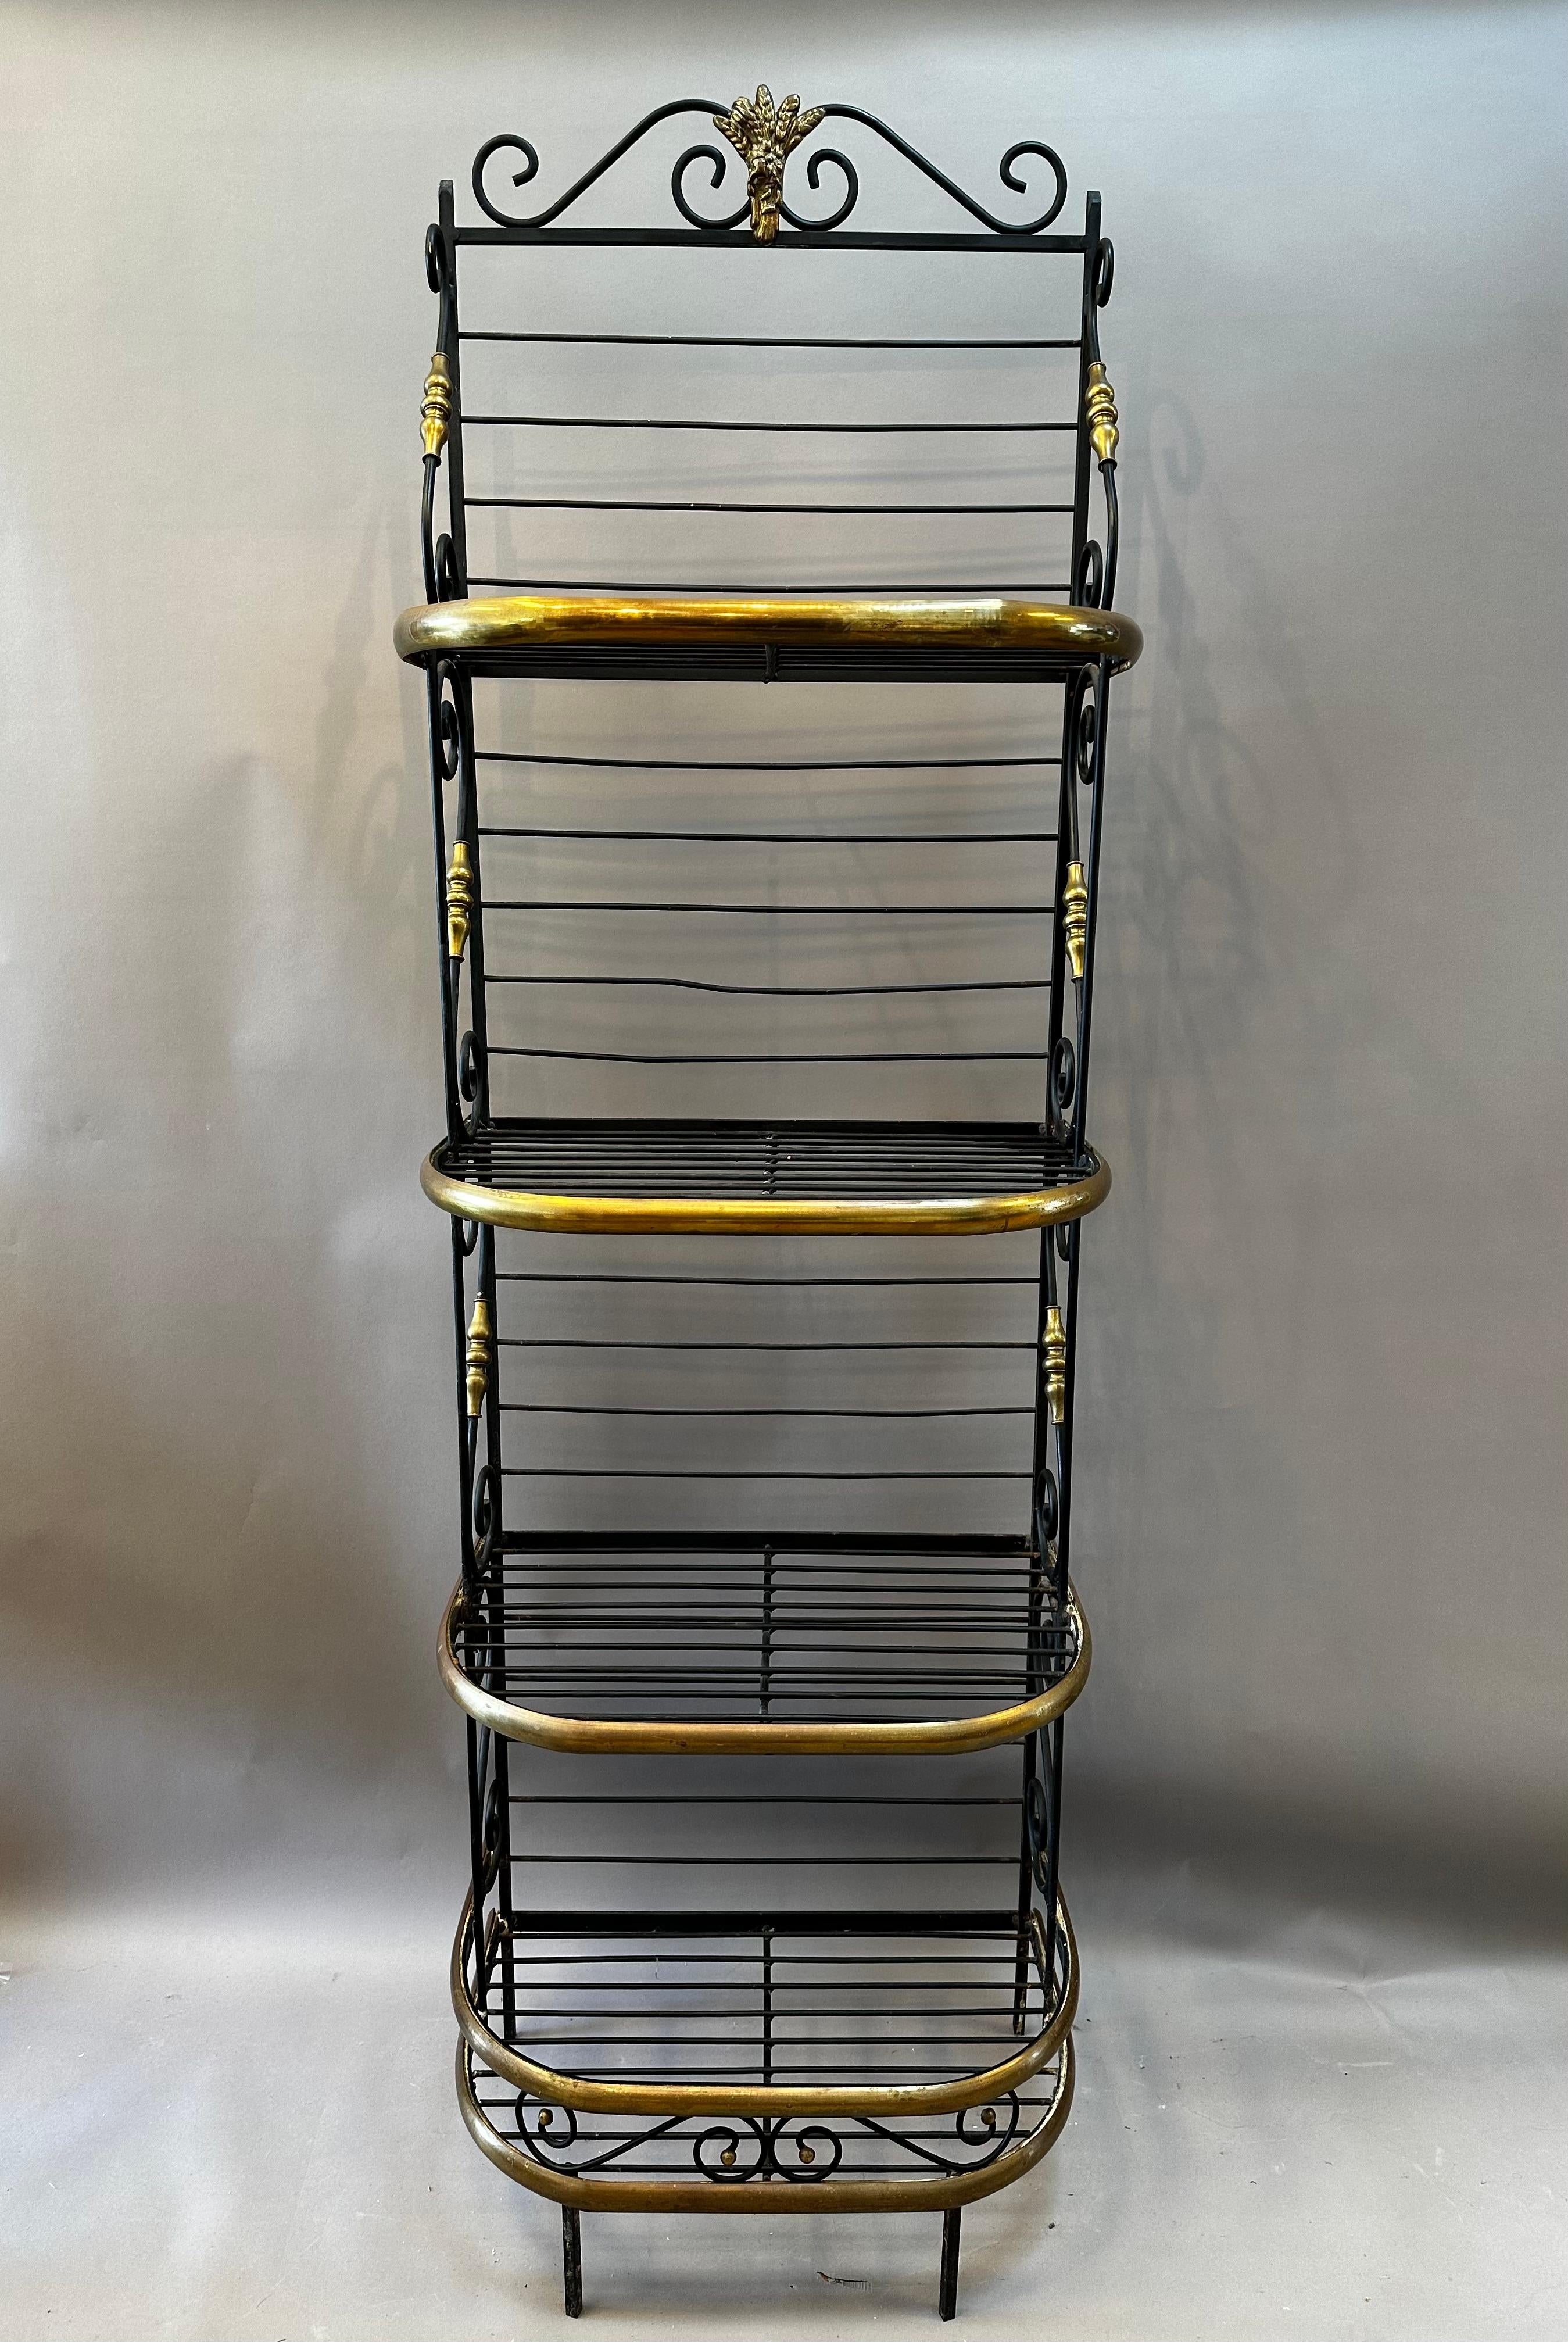 19th Century French Provincial Baker’s Rack. Wonderful Craftsmanship Made of scrolled steel with decorative brass details. Rare Small proportions. Normandy, circa 1890.